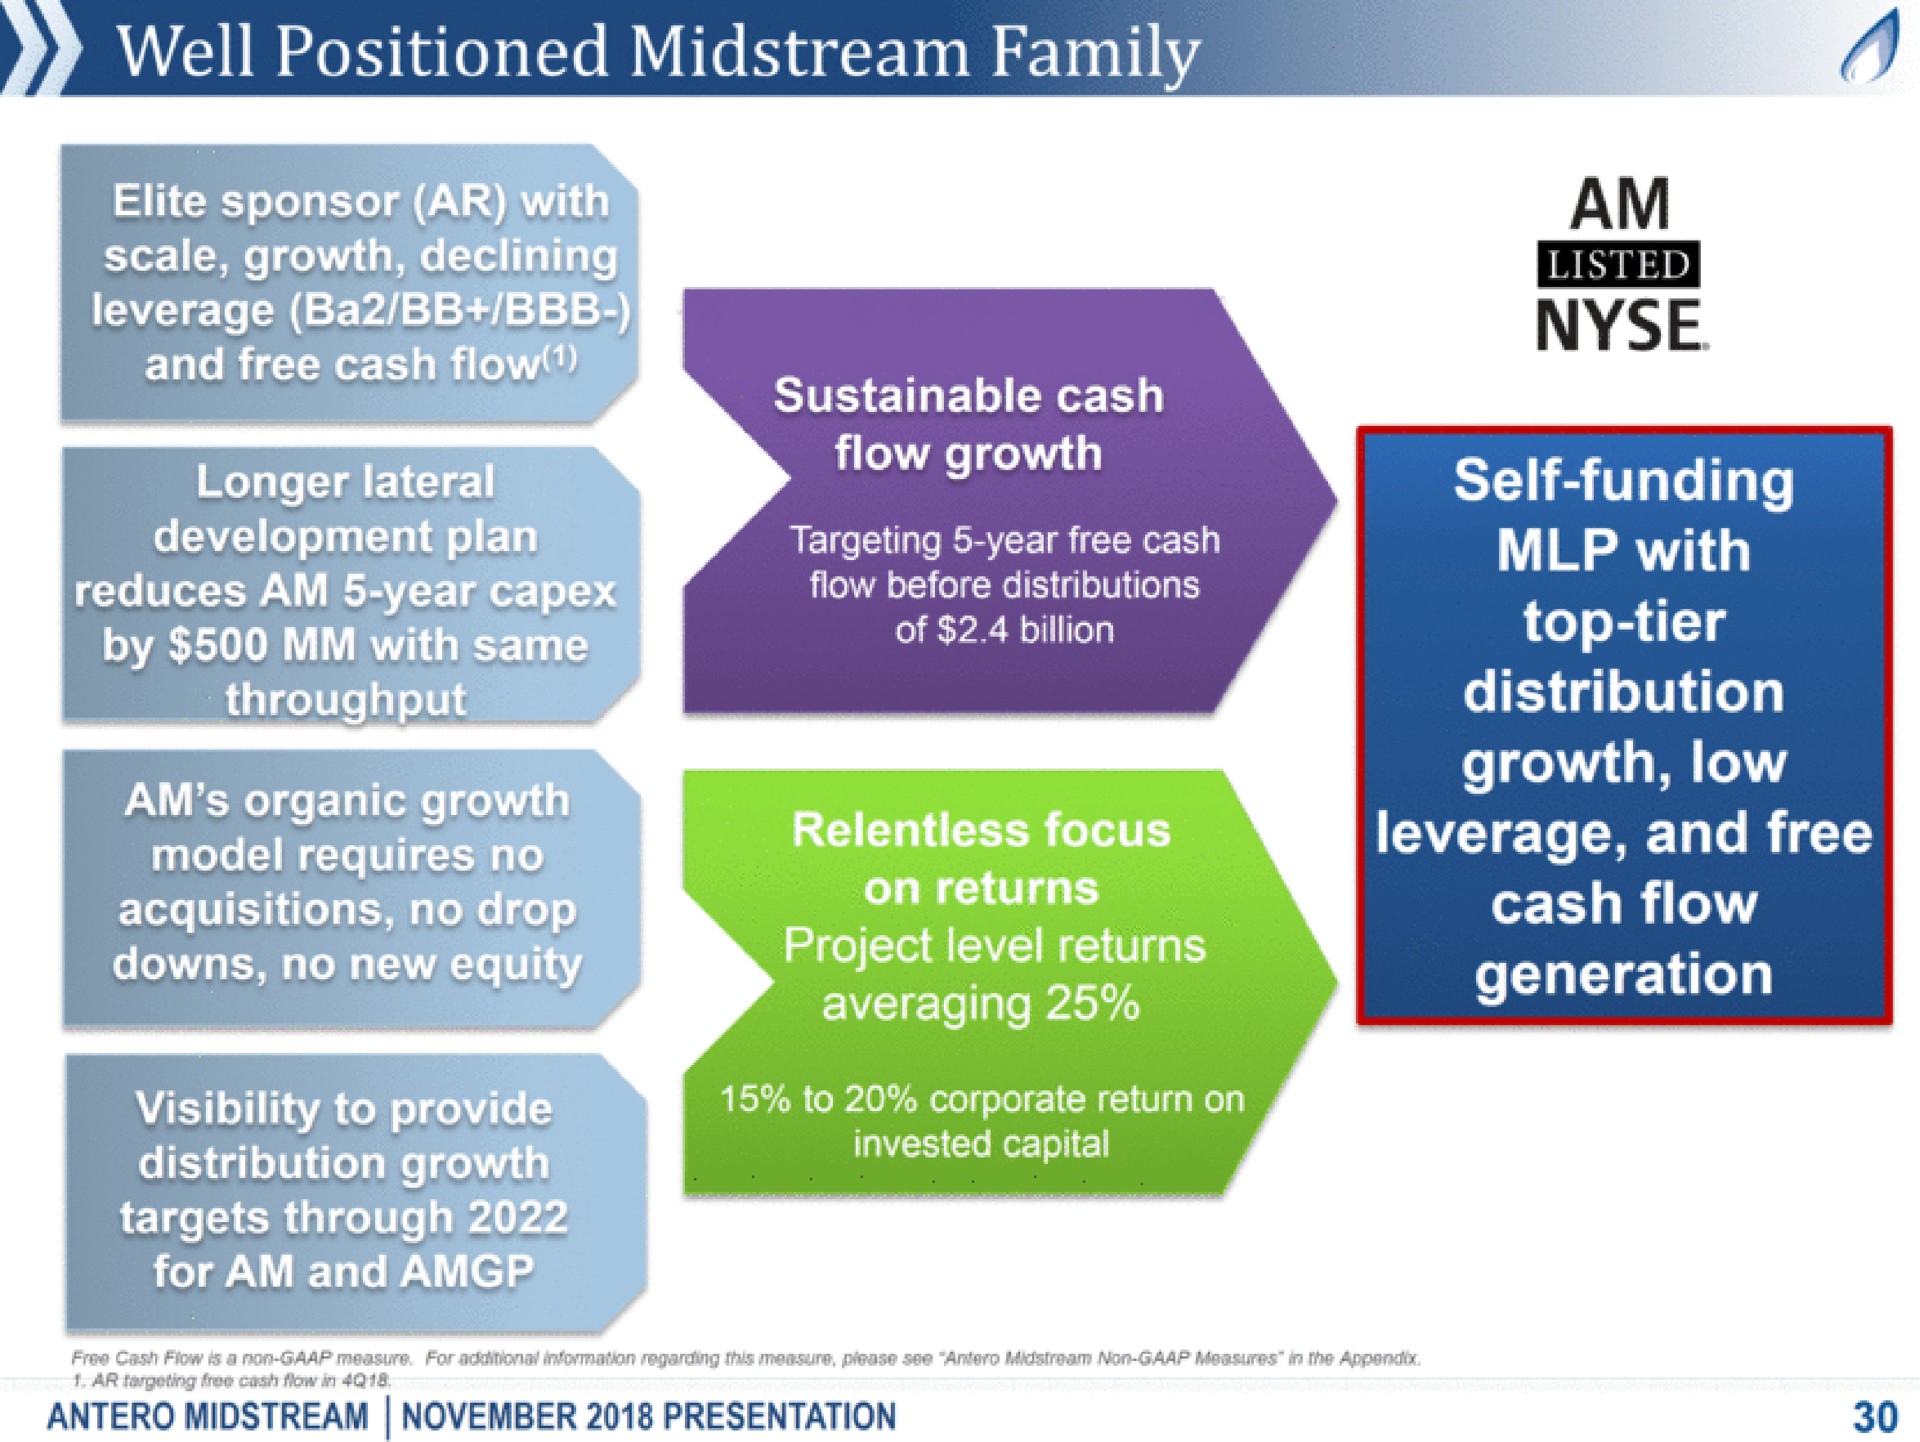 well positioned midstream family self funding with top tier distribution growth low leverage and free cash flow generation sustainable cash flow growth targeting year free cash flow before distributions eye project level returns averaging to corporate return on invested capital and visibility to distribution targets through free gash flow a non measure free flow in midstream presentation is see mon in he appendix | Antero Midstream Partners